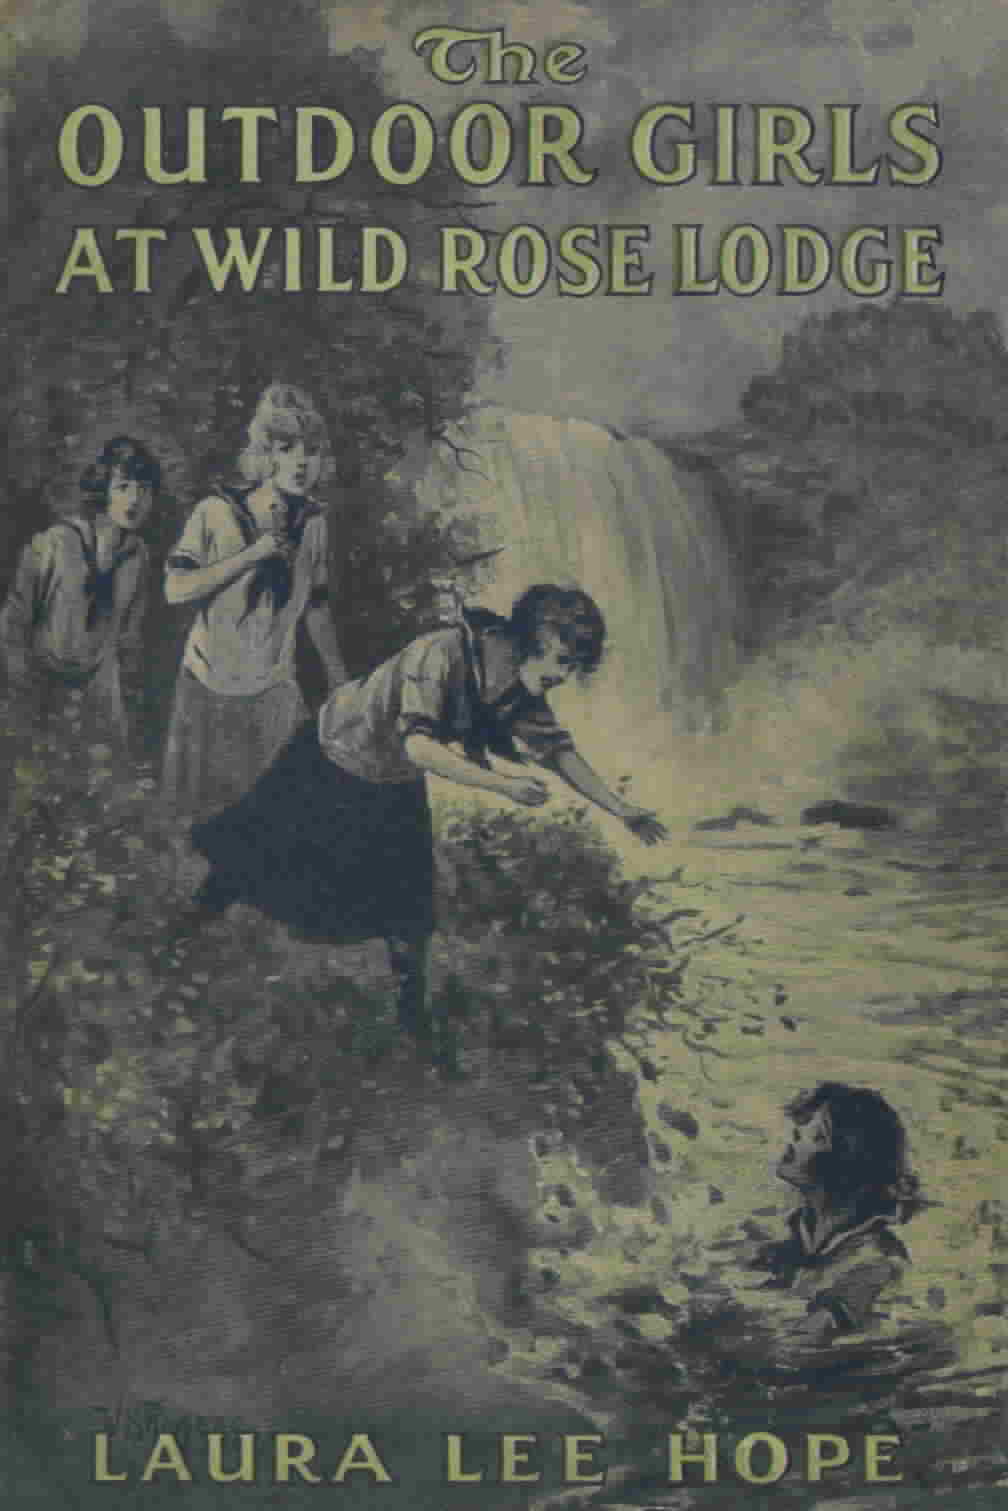 11. The Outdoor Girls at Wild Rose Lodge